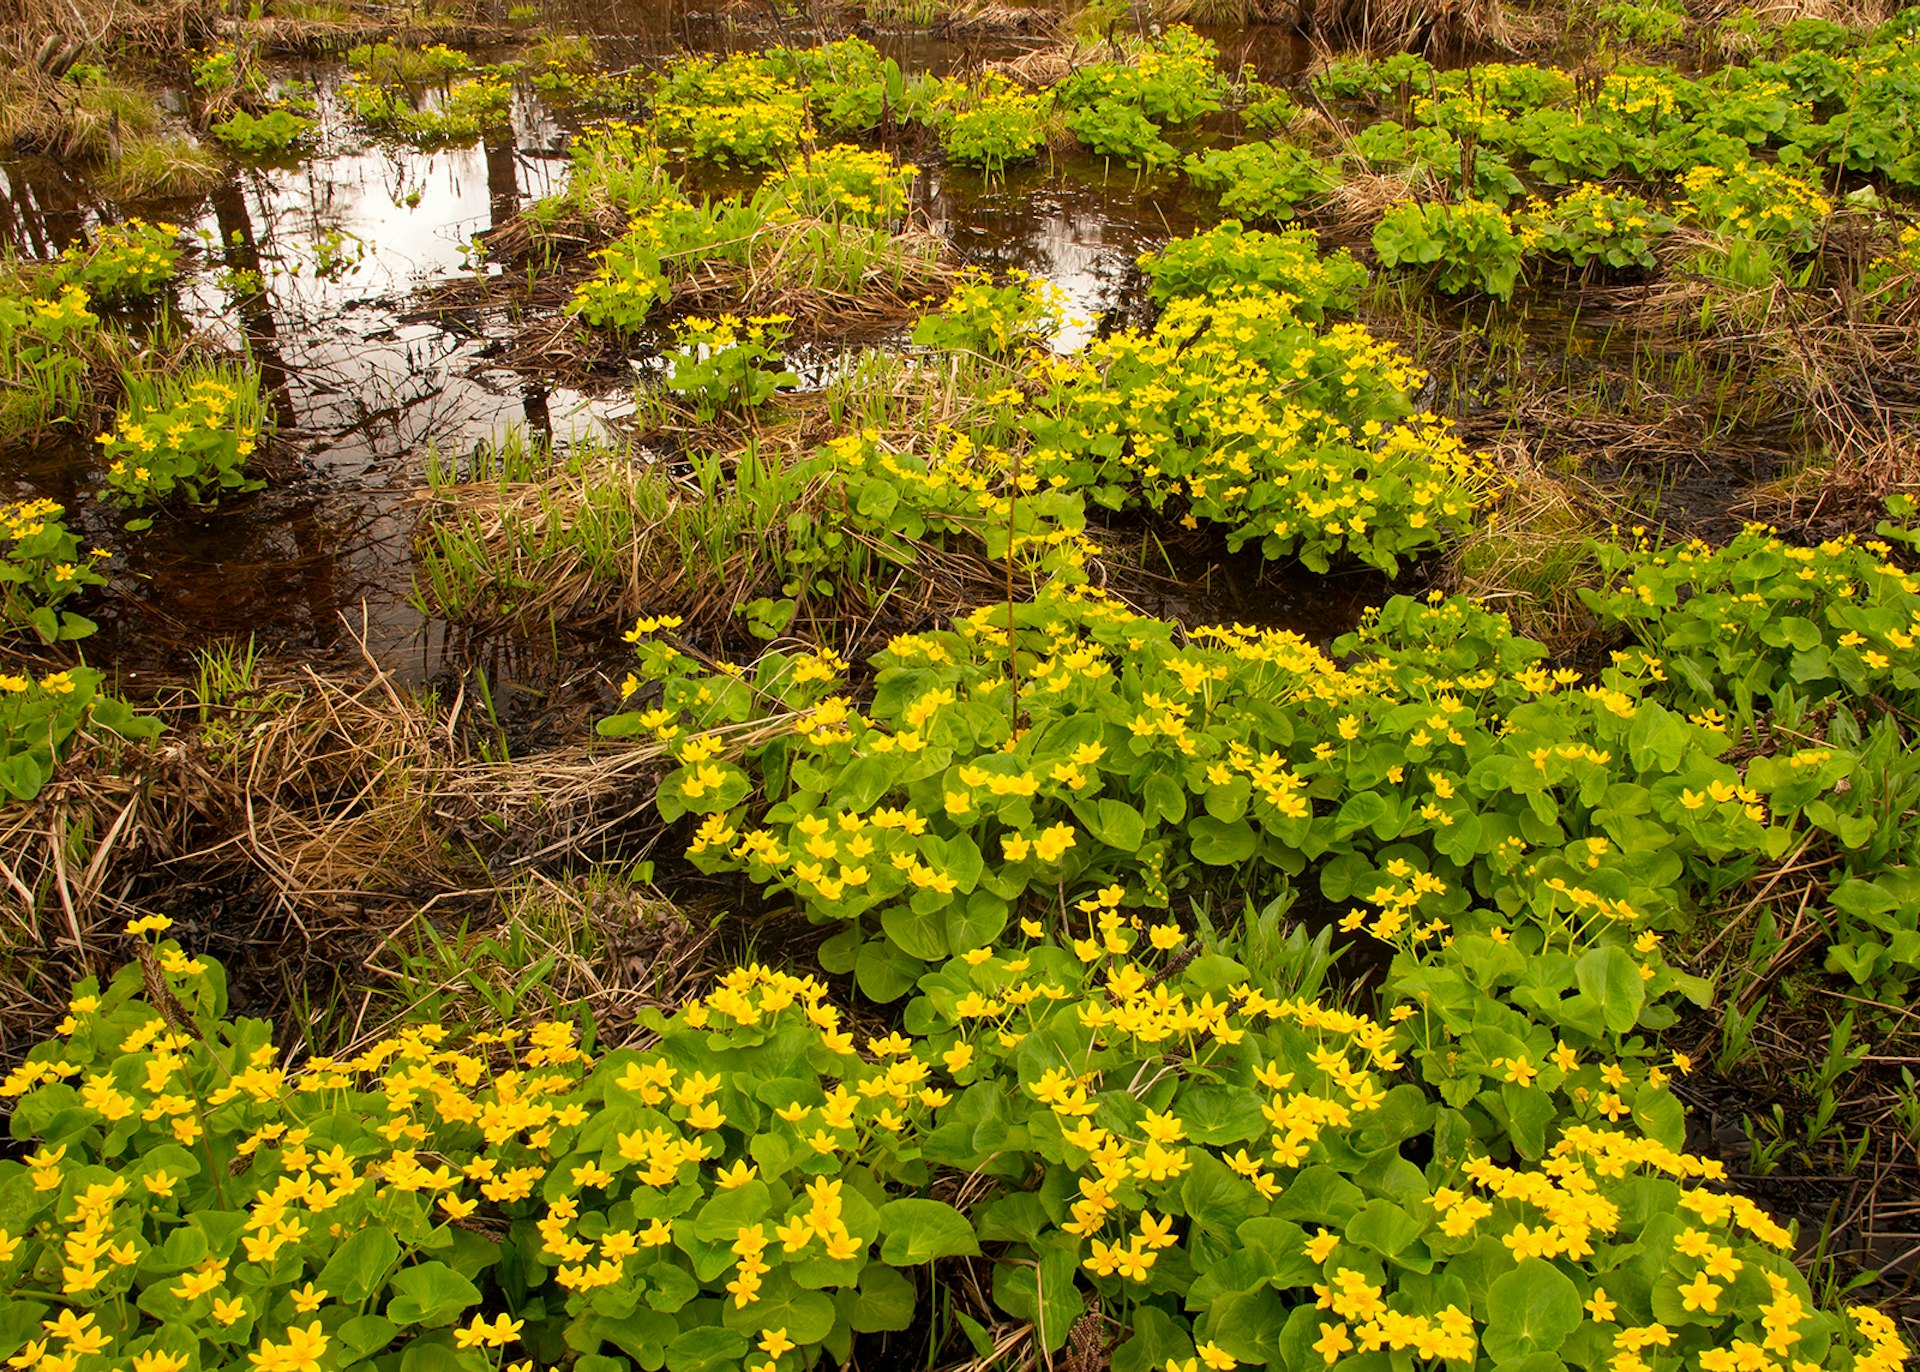 The marsh marigolds of Cranberry Glades